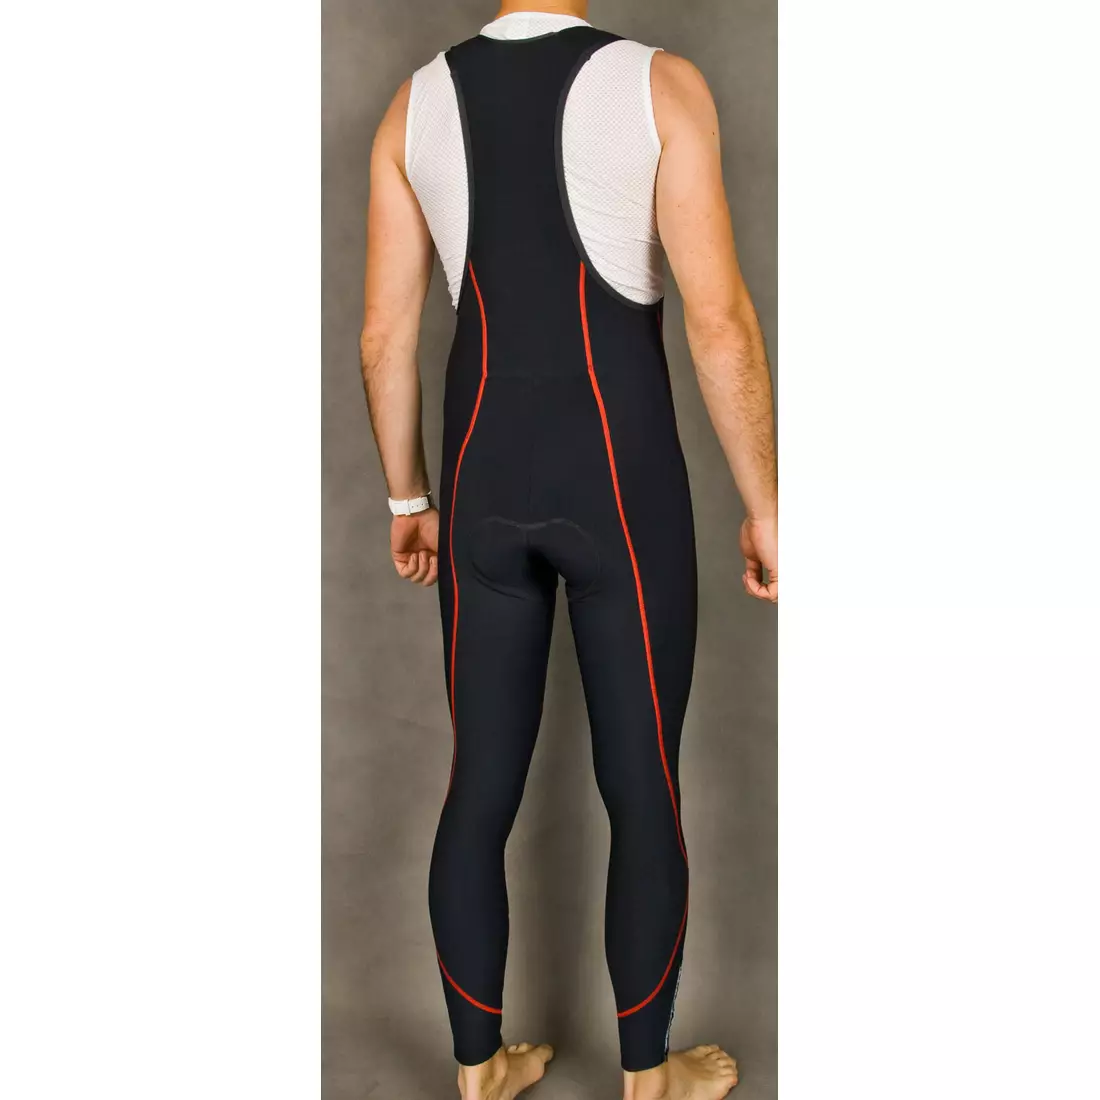 MikeSPORT GEXO insulated cycling pants with COMP HP insert, bibs, black and red seams